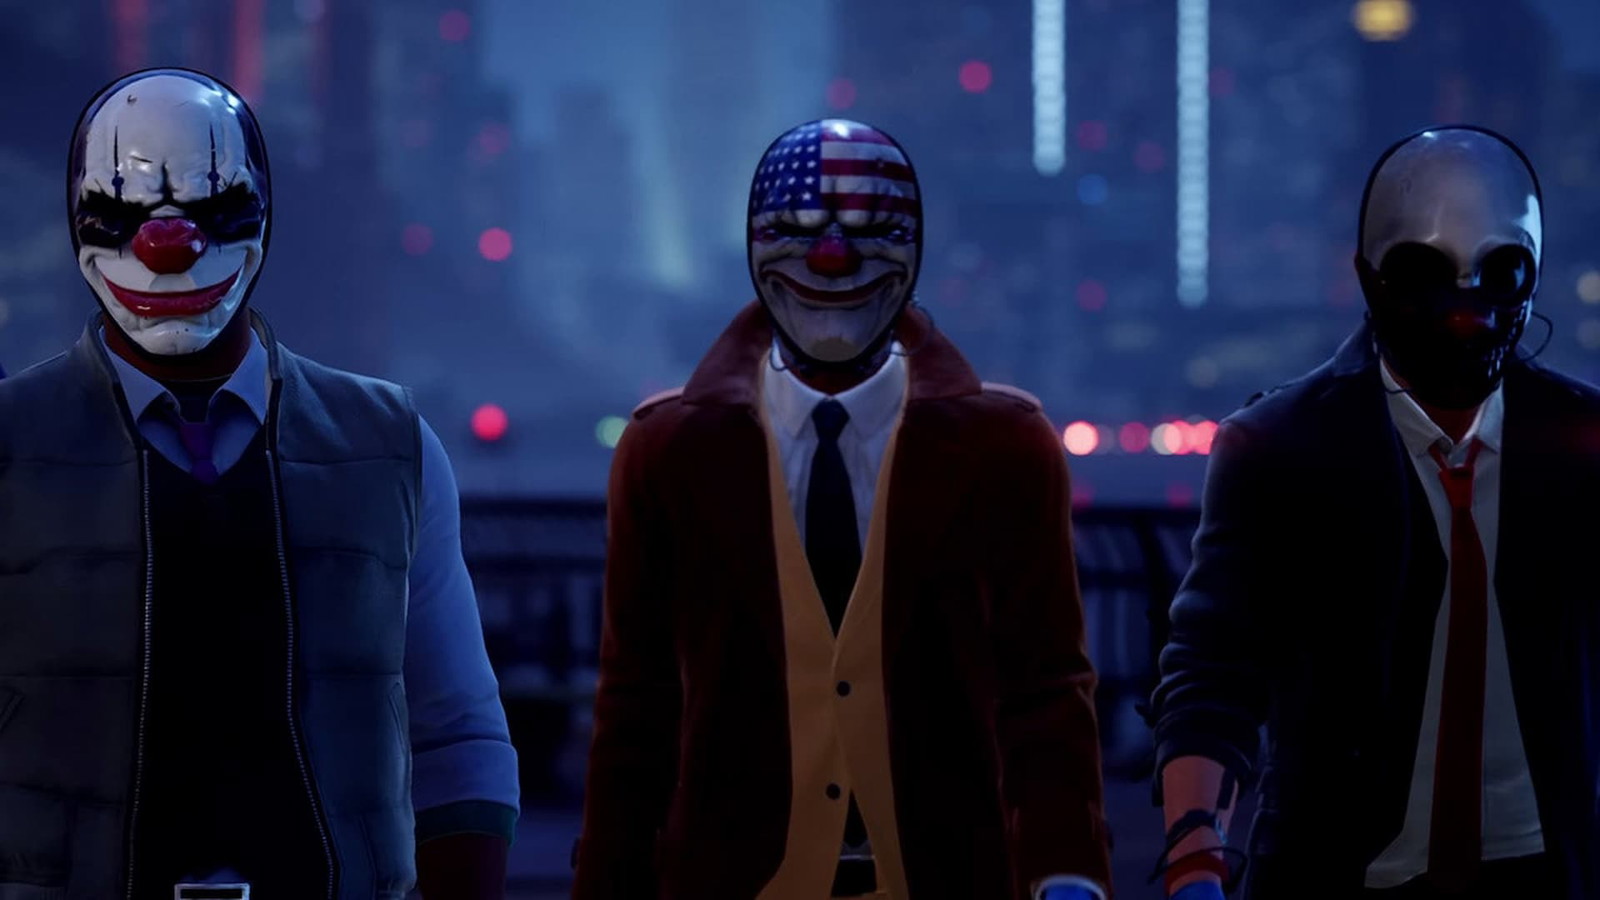 Payday 3 could have an offline mode in the future